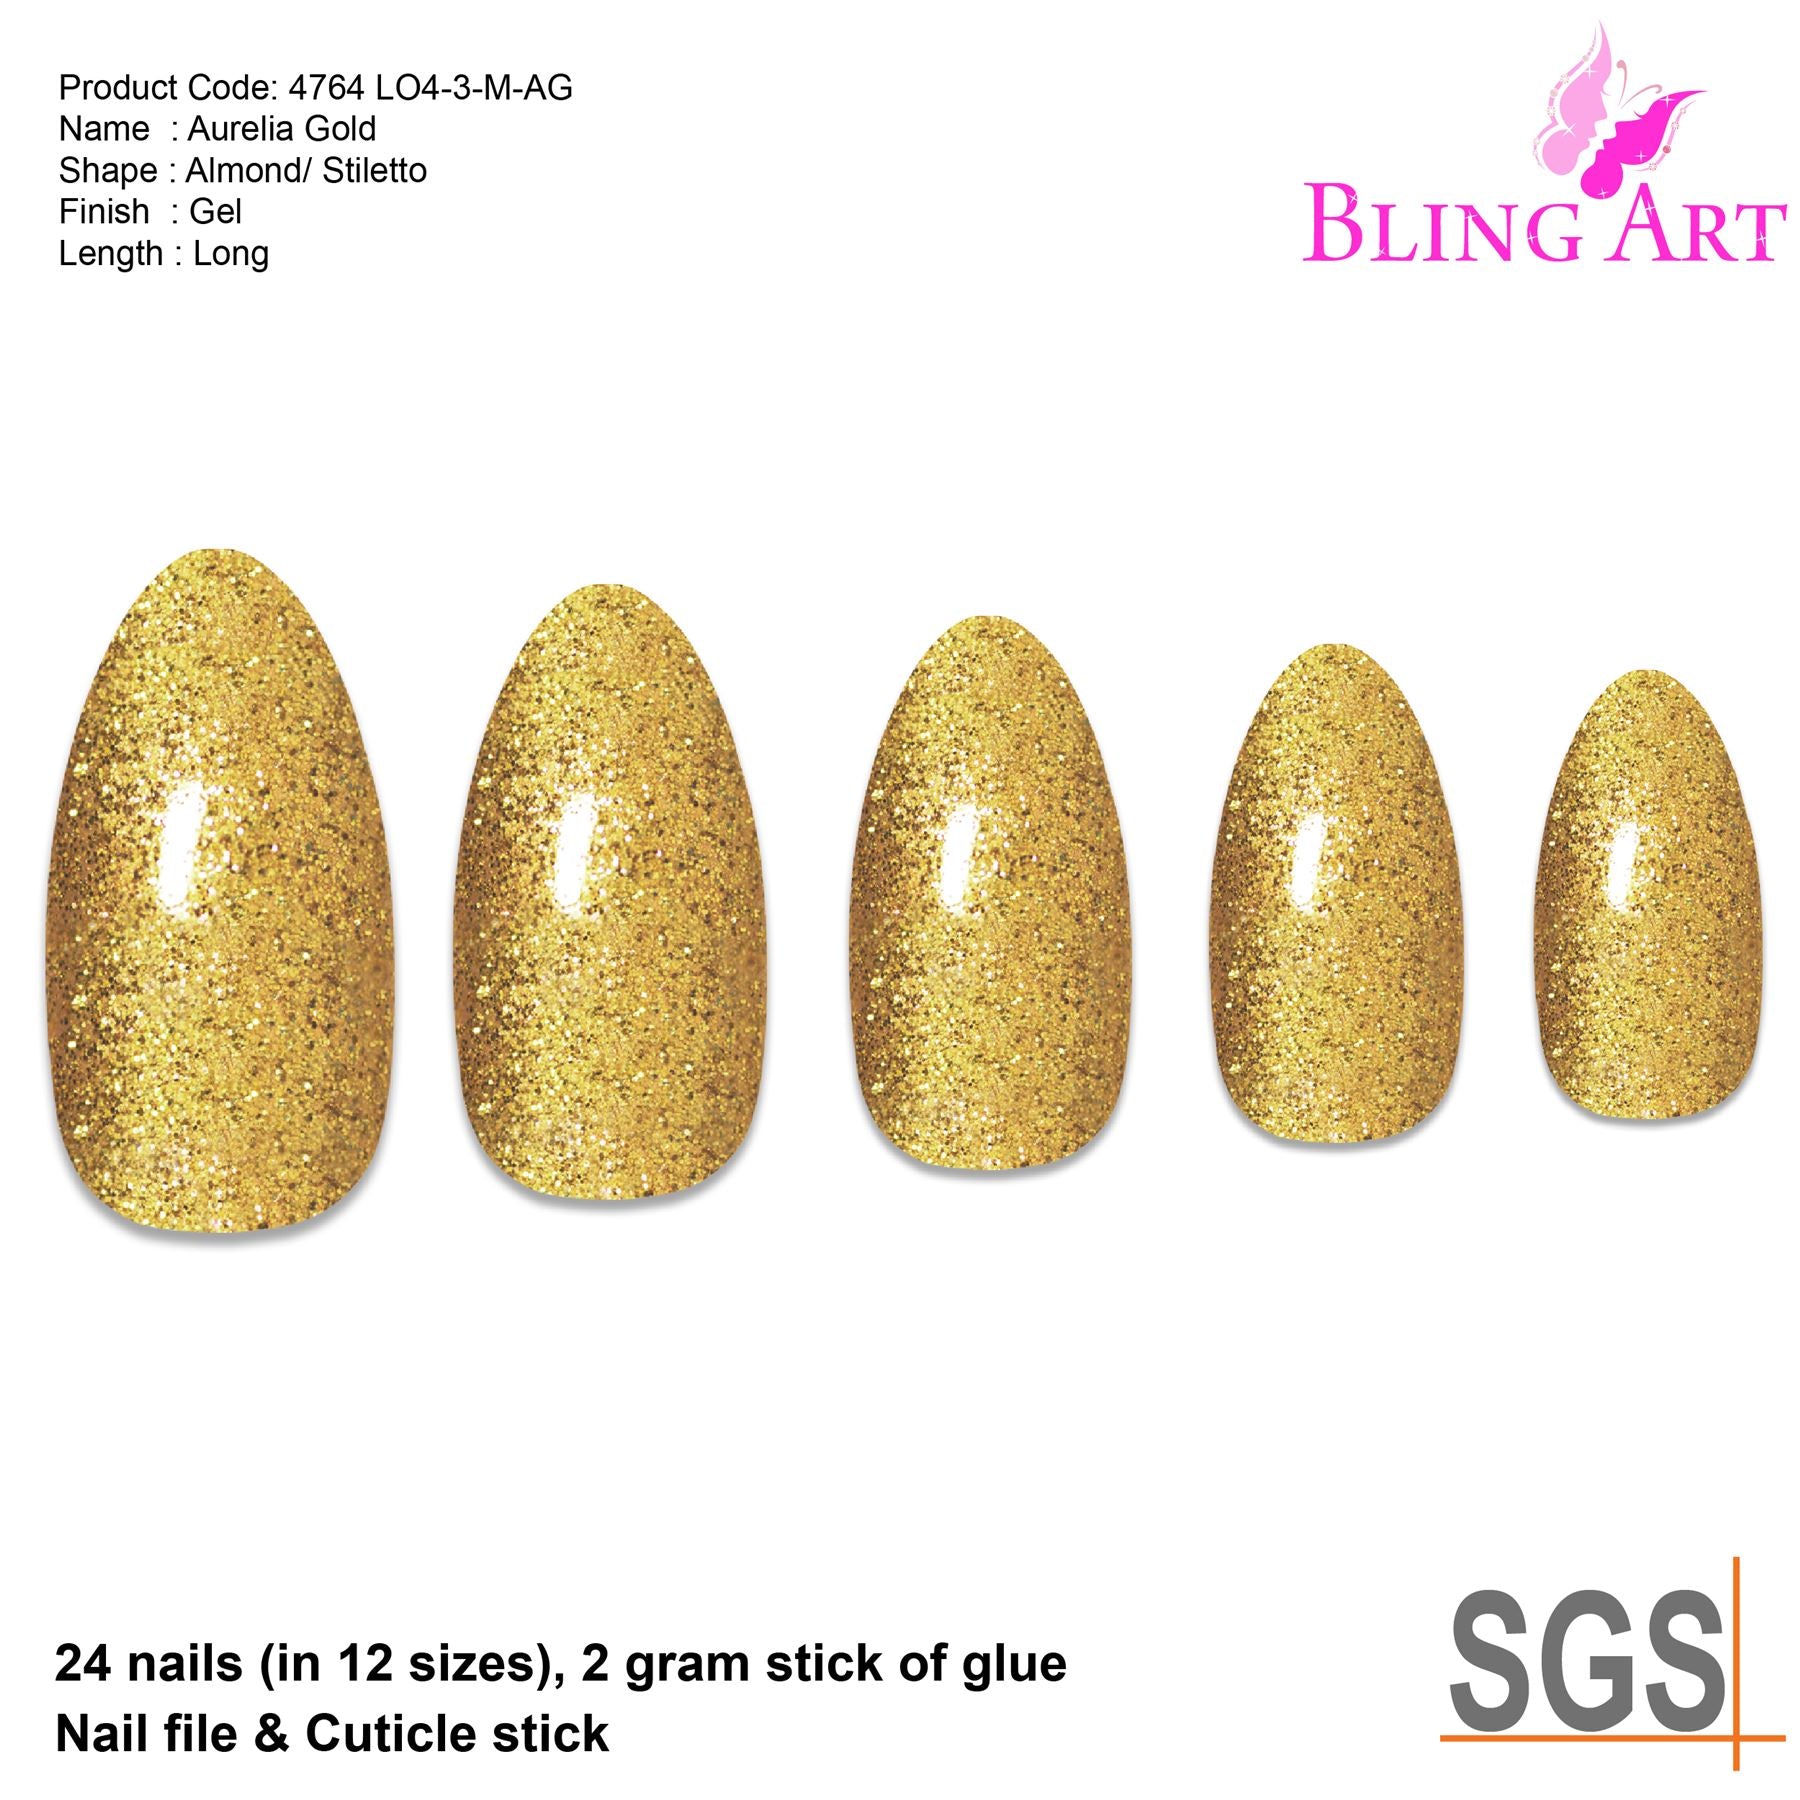 False Nails Bling Art Gold Gel Almond Stiletto Long Fake Acrylic Tips with Glue